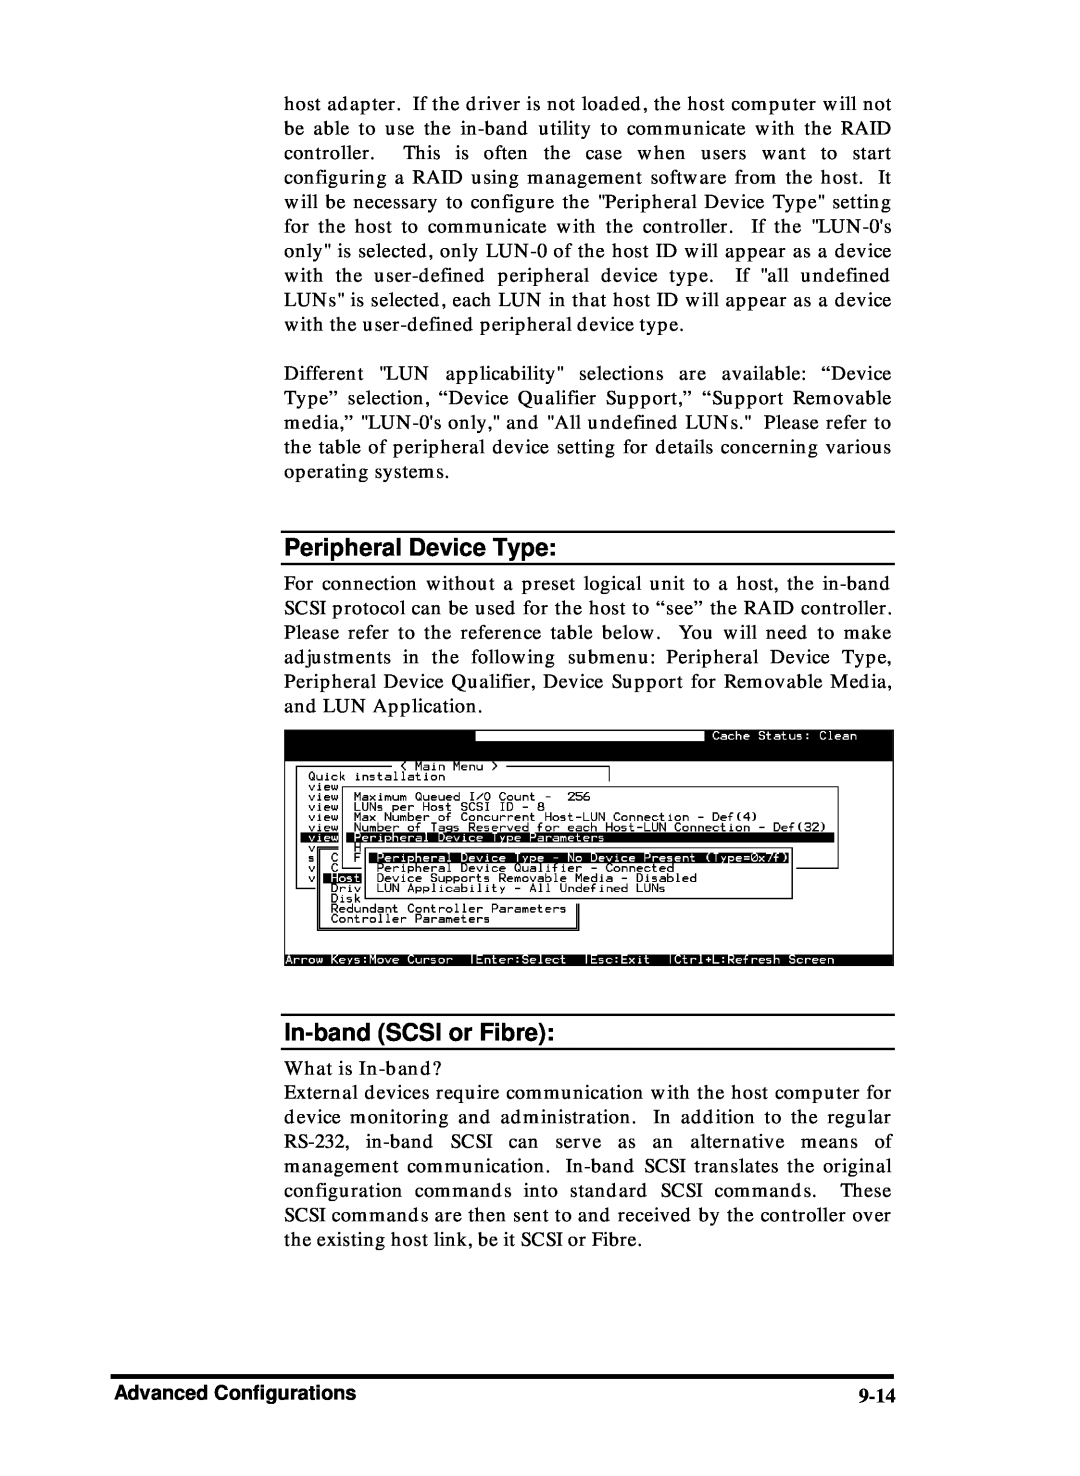 Compaq Infortrend manual Peripheral Device Type, In-band SCSI or Fibre, What is In-band?, 9-14 